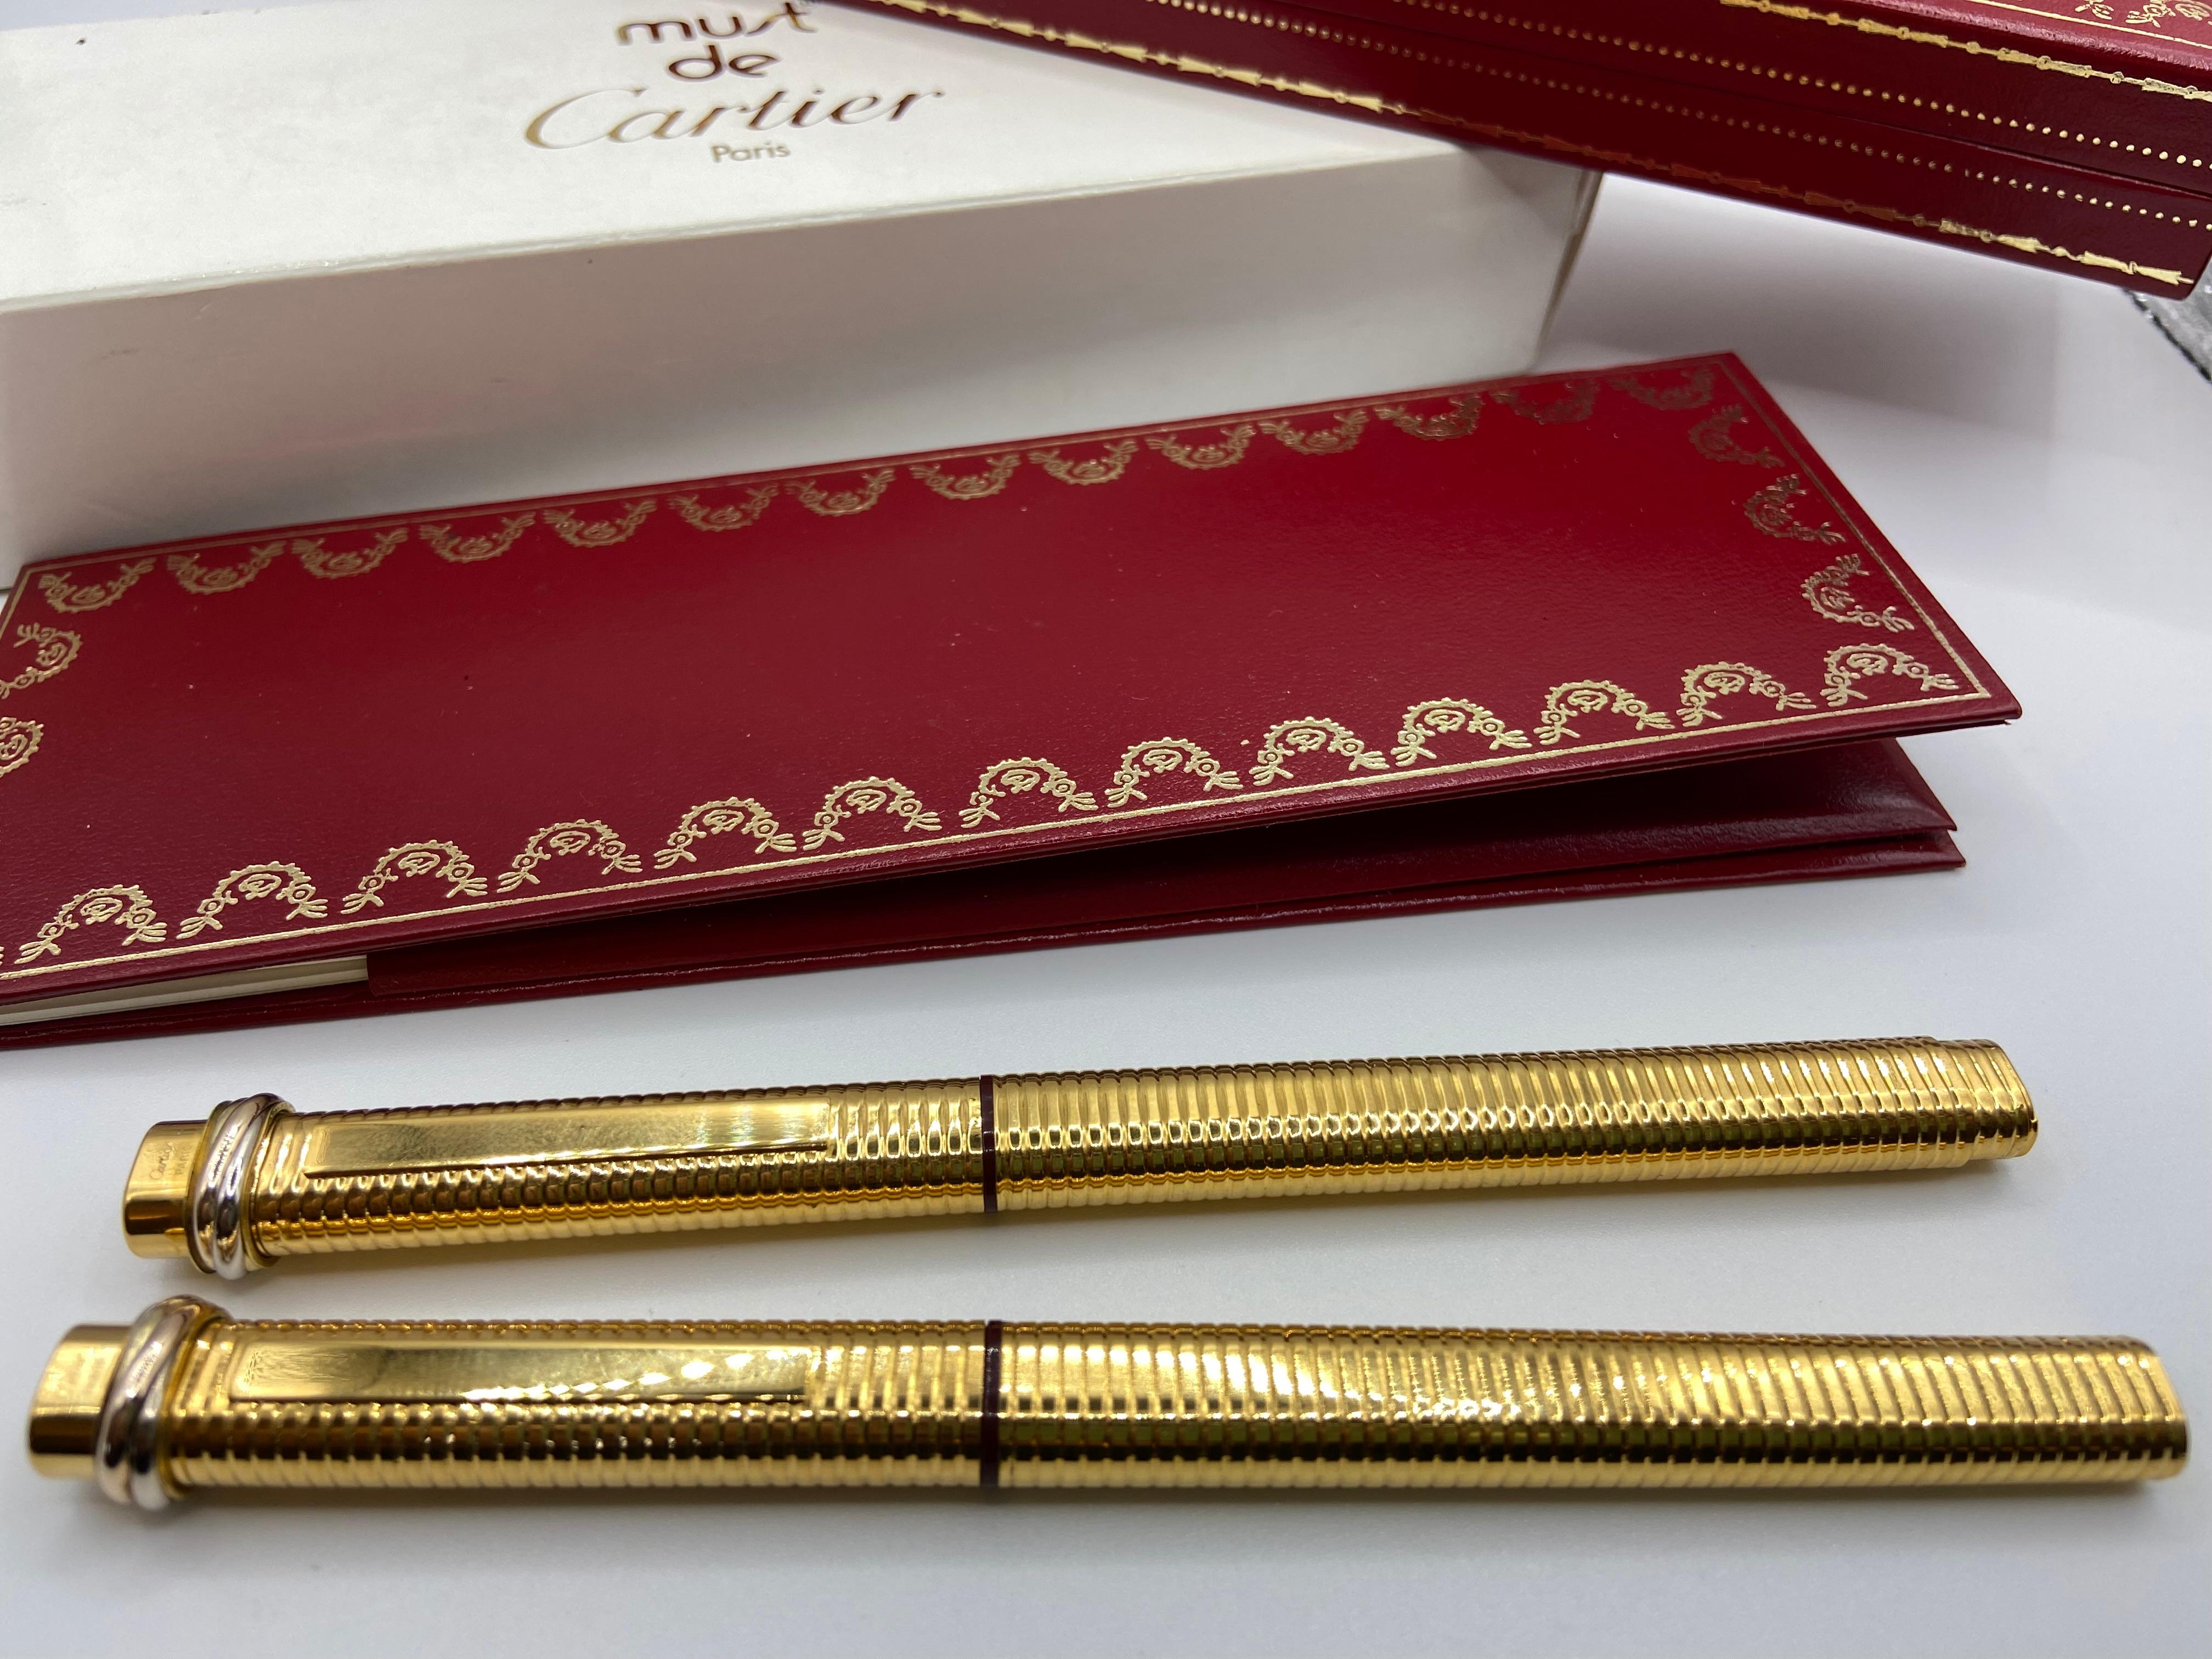 Two Pens, a Fountain Pen and a Roller, Santos by Must de Cartier, 18 Kt Gold Plated 5